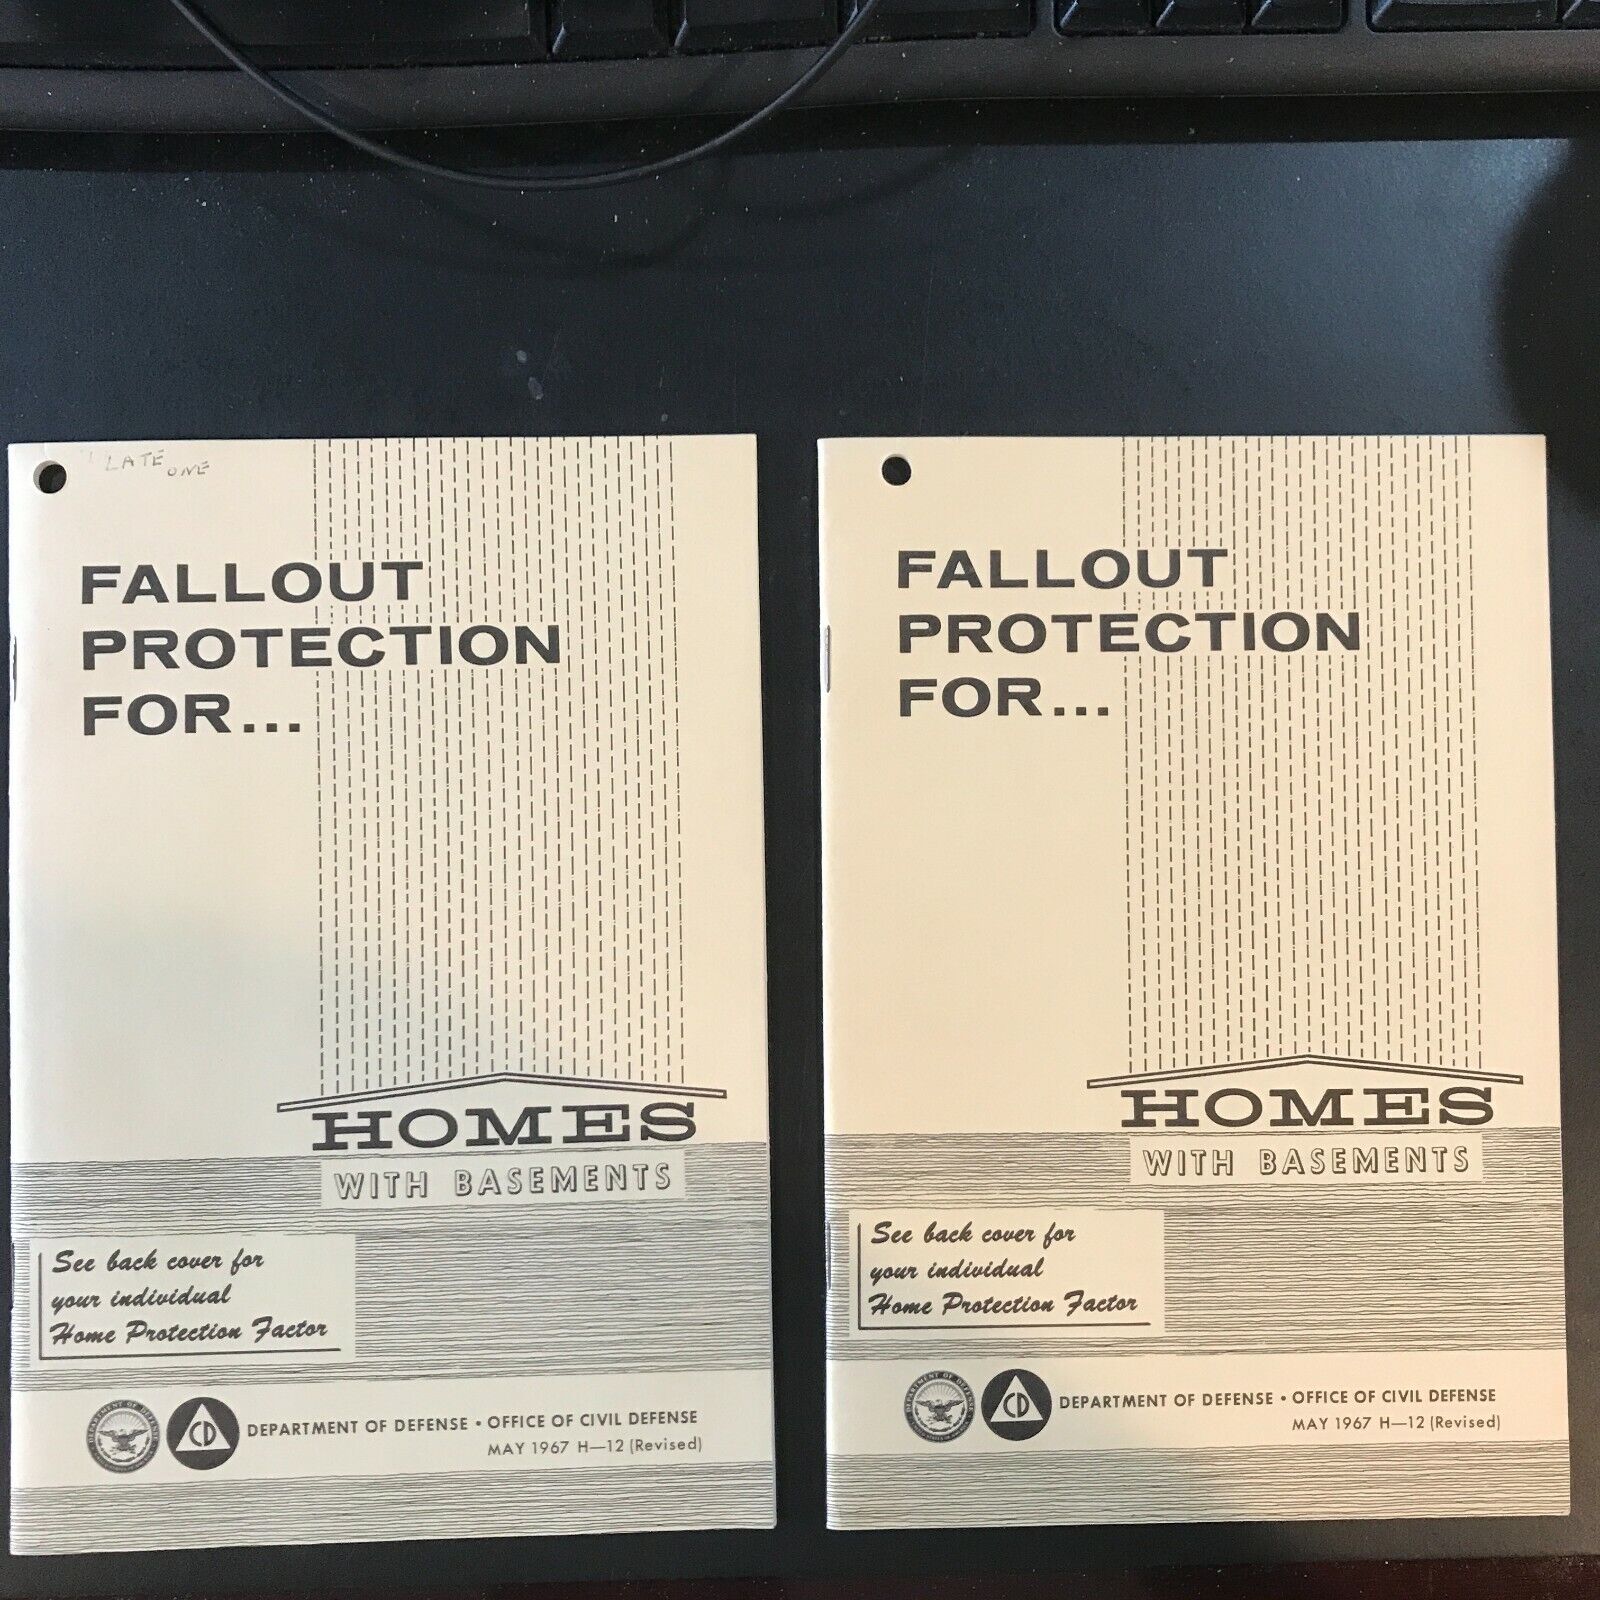 1967 Fallout Protection For Homes w/ Basements Booklets - Lot of 2 - Letter